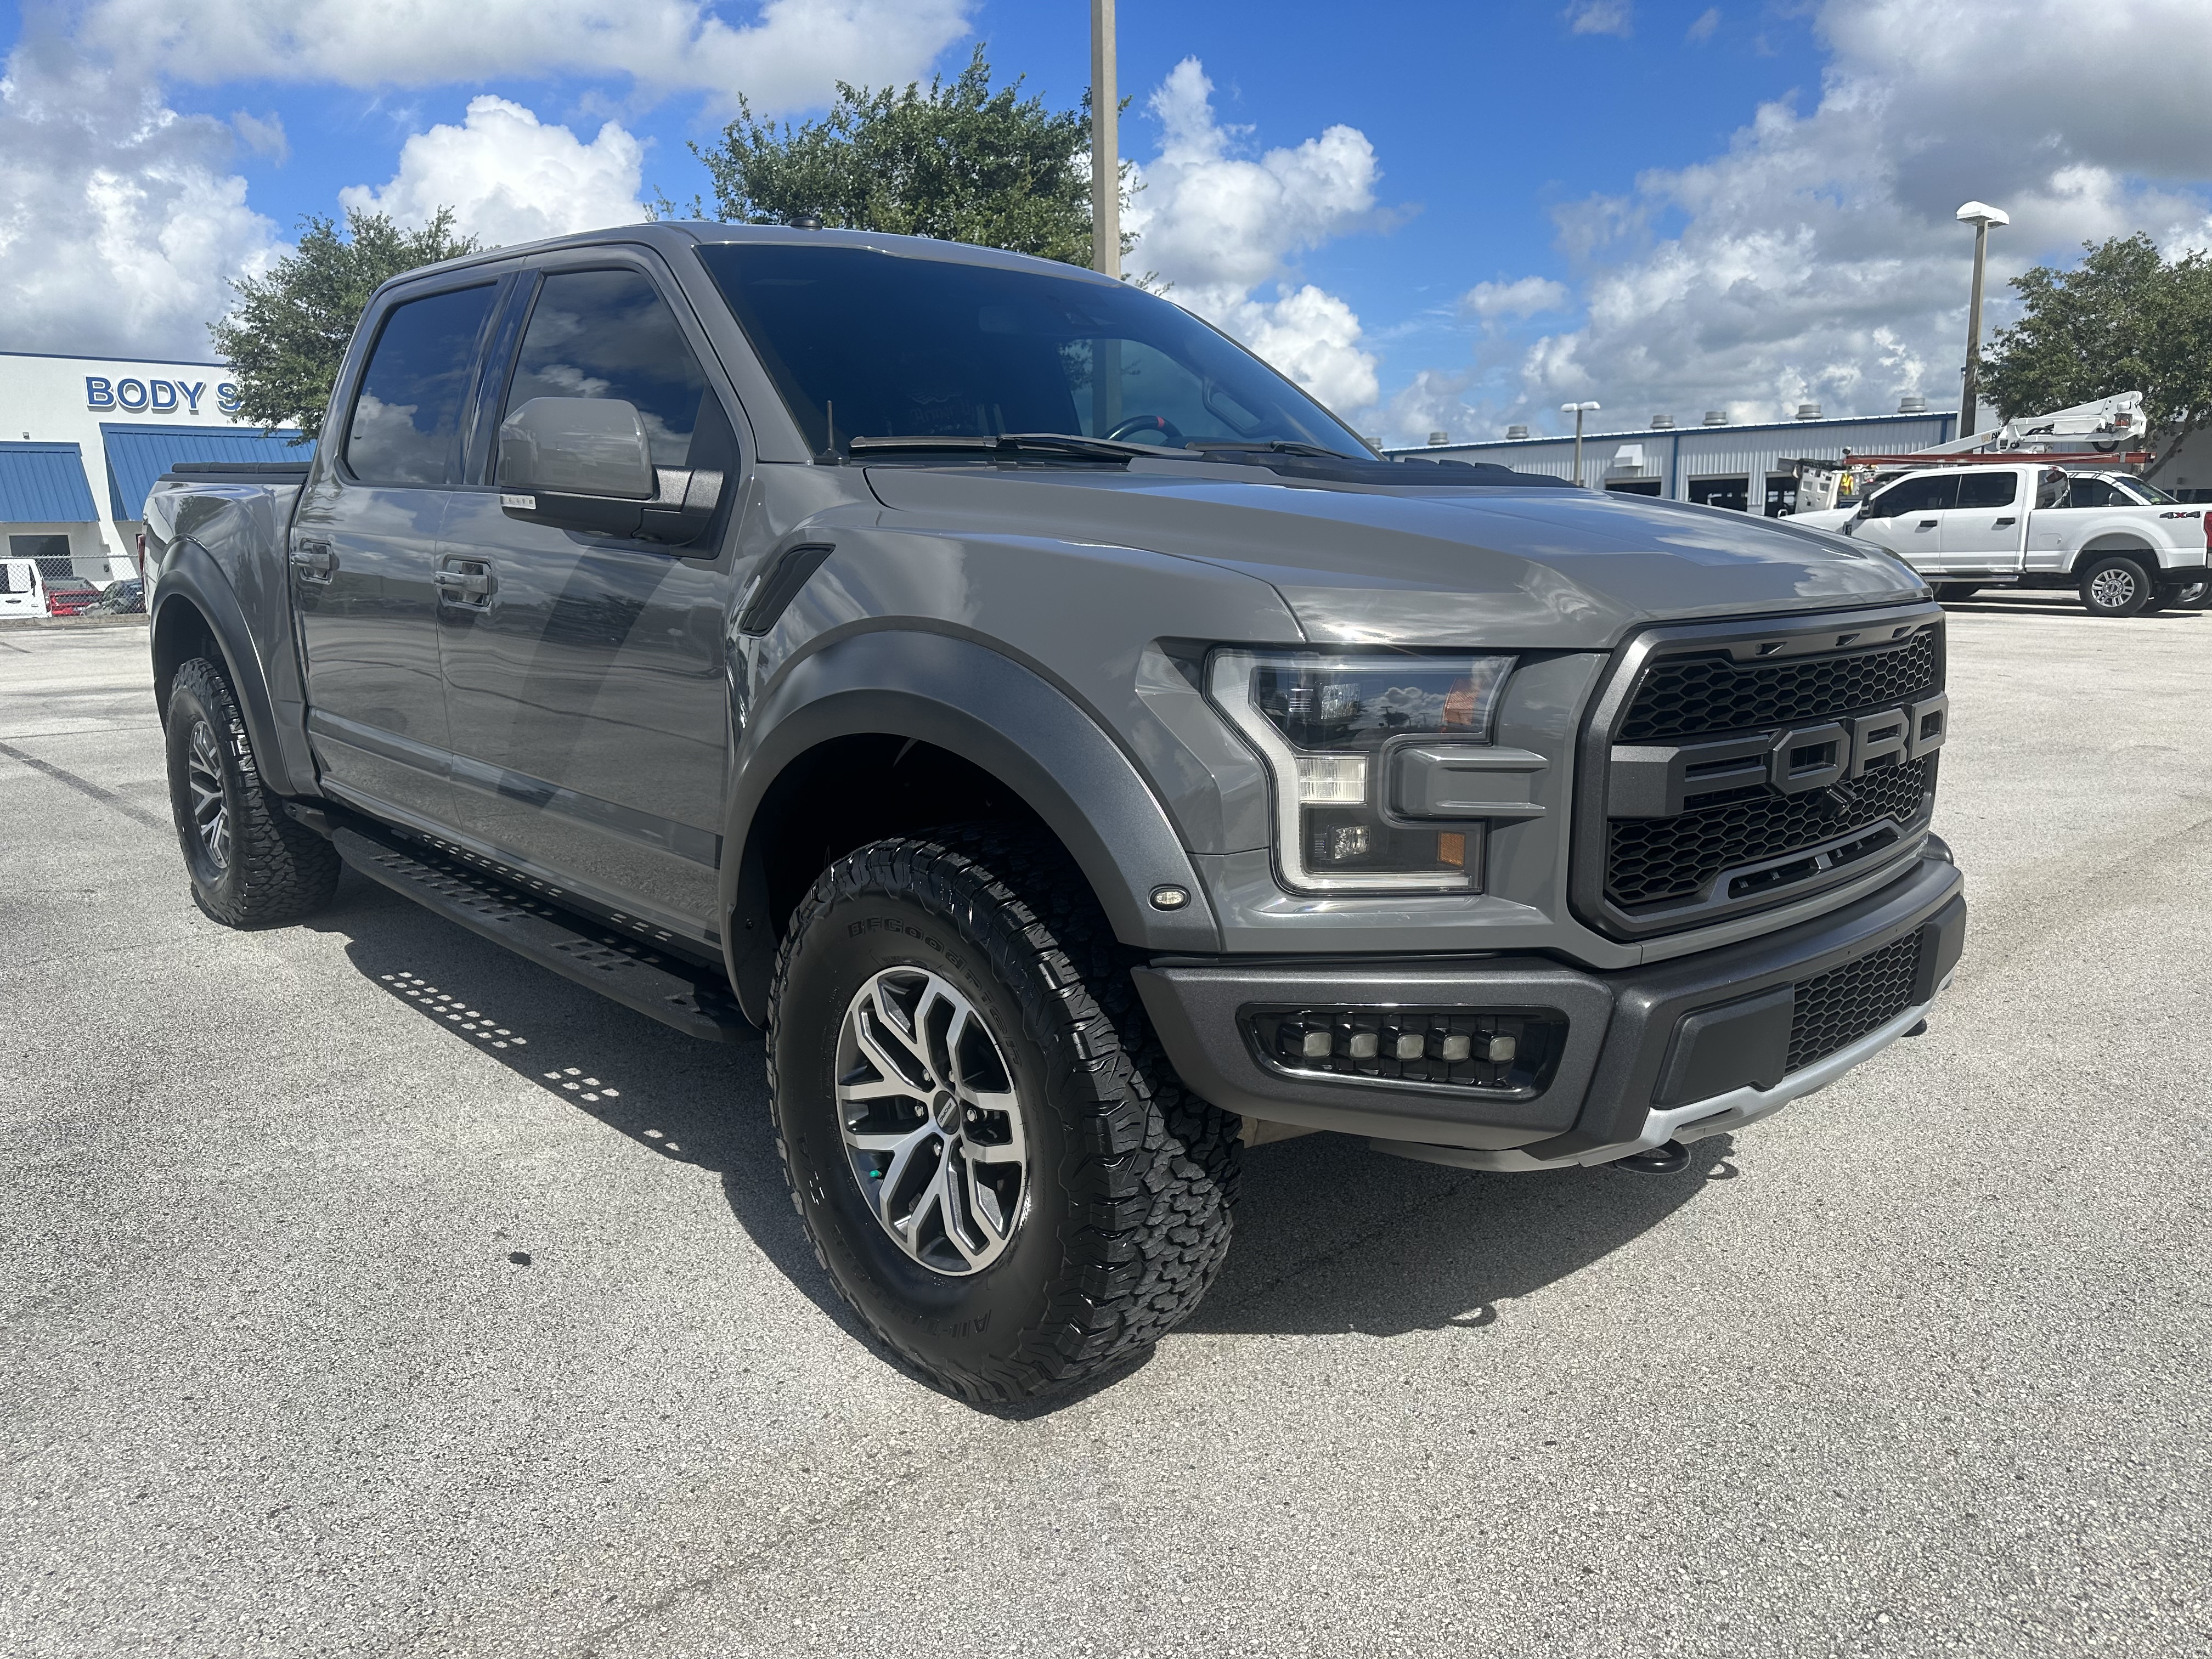 Used 2018 Ford F150 Raptor for Sale Right Now - Autotrader